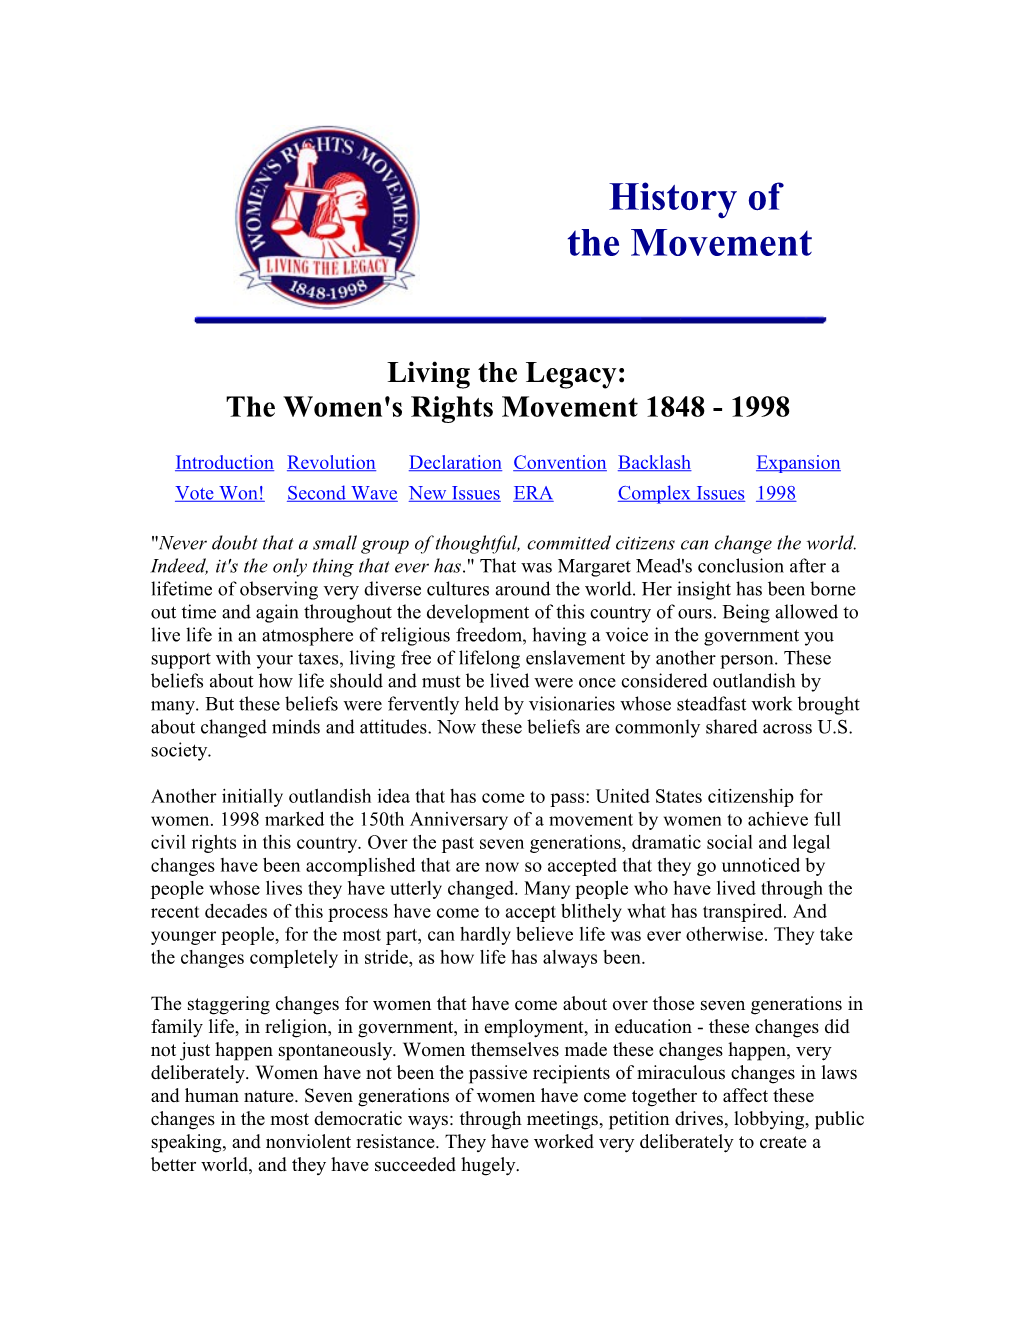 Living the Legacy: the Women's Rights Movement 1848 - 1998